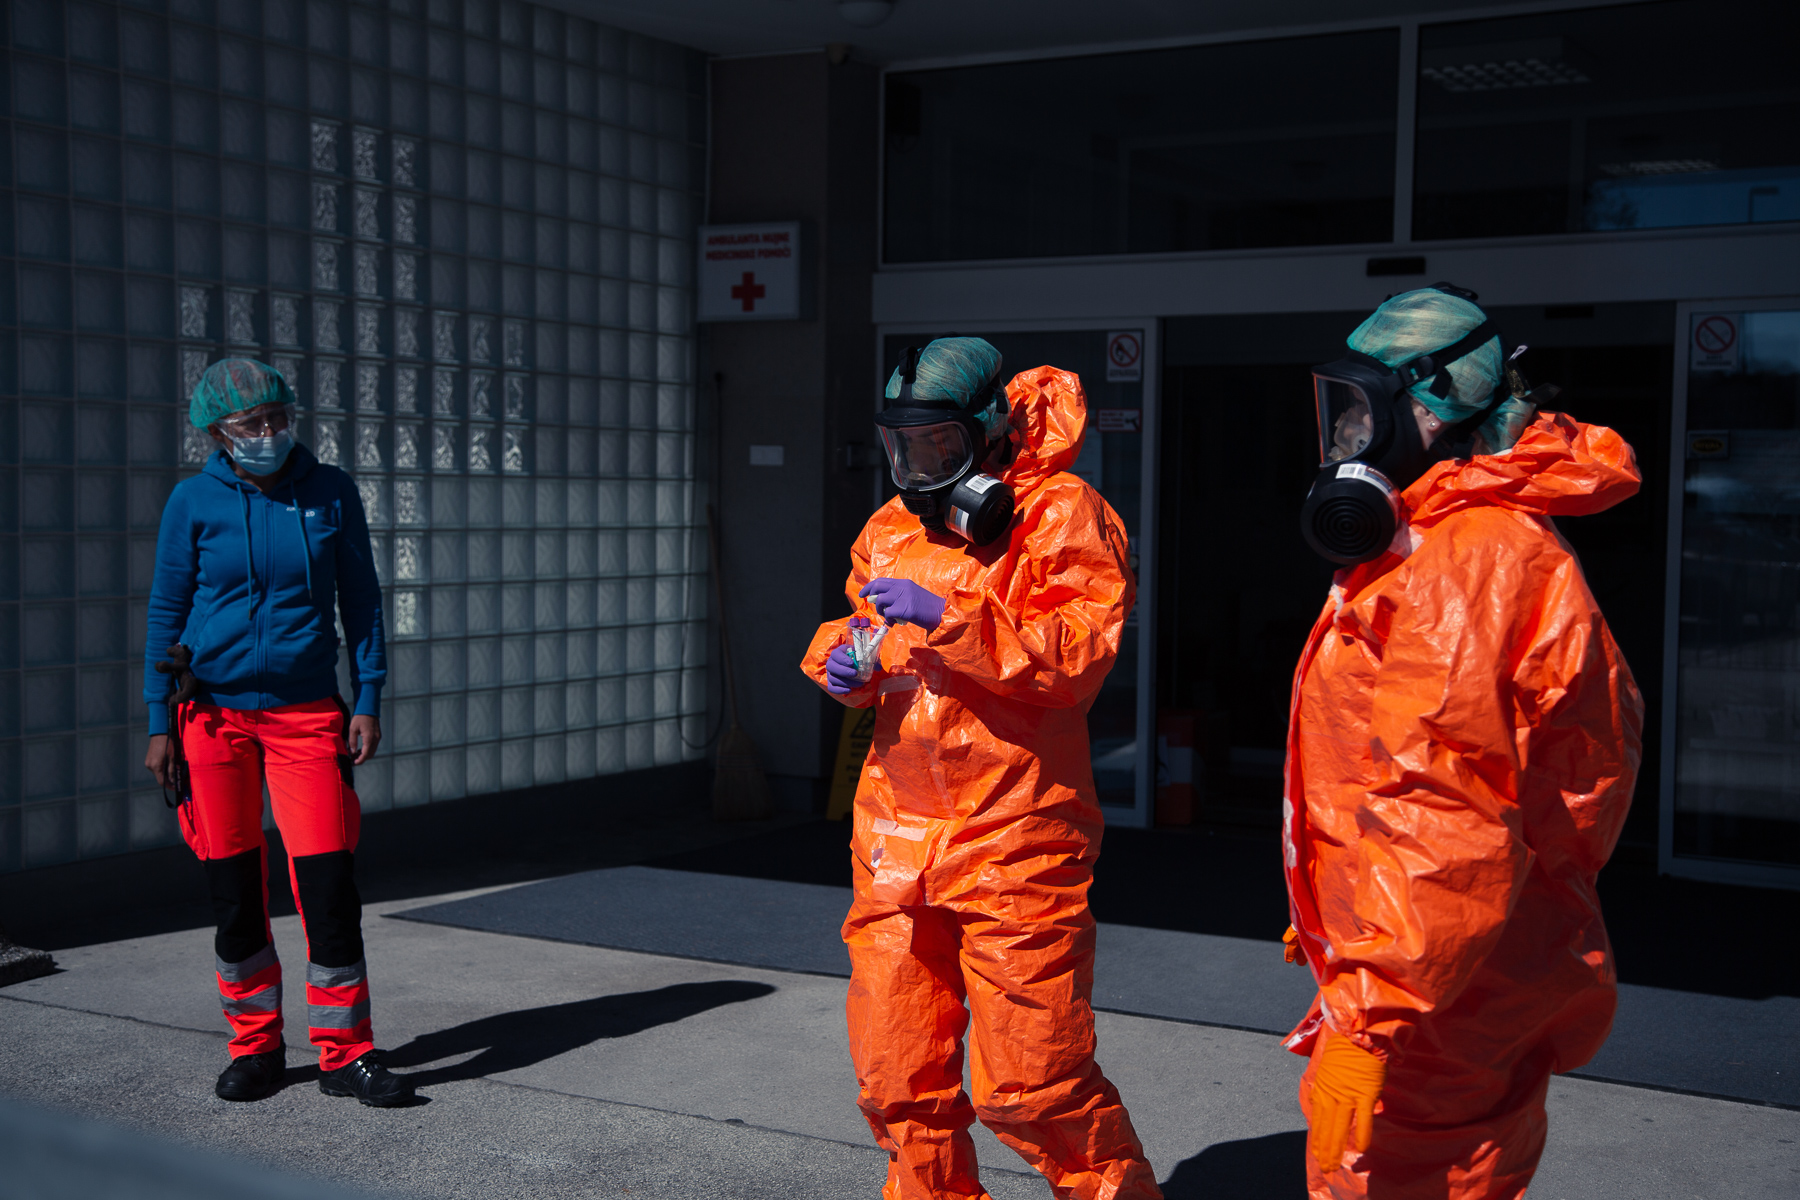 Medical personnel in hazmat suits prepare test tubes as they wait at the COVID-19 testing site in Bled, Slovenia, for patients to arrive at a scheduled hour on April 16, 2020. Given the low frequency of tests in this small town, famous for its world famous tourist attraction Lake Bled, this system was put in place in order to save on protective equipment that needs to be discarded after each use.